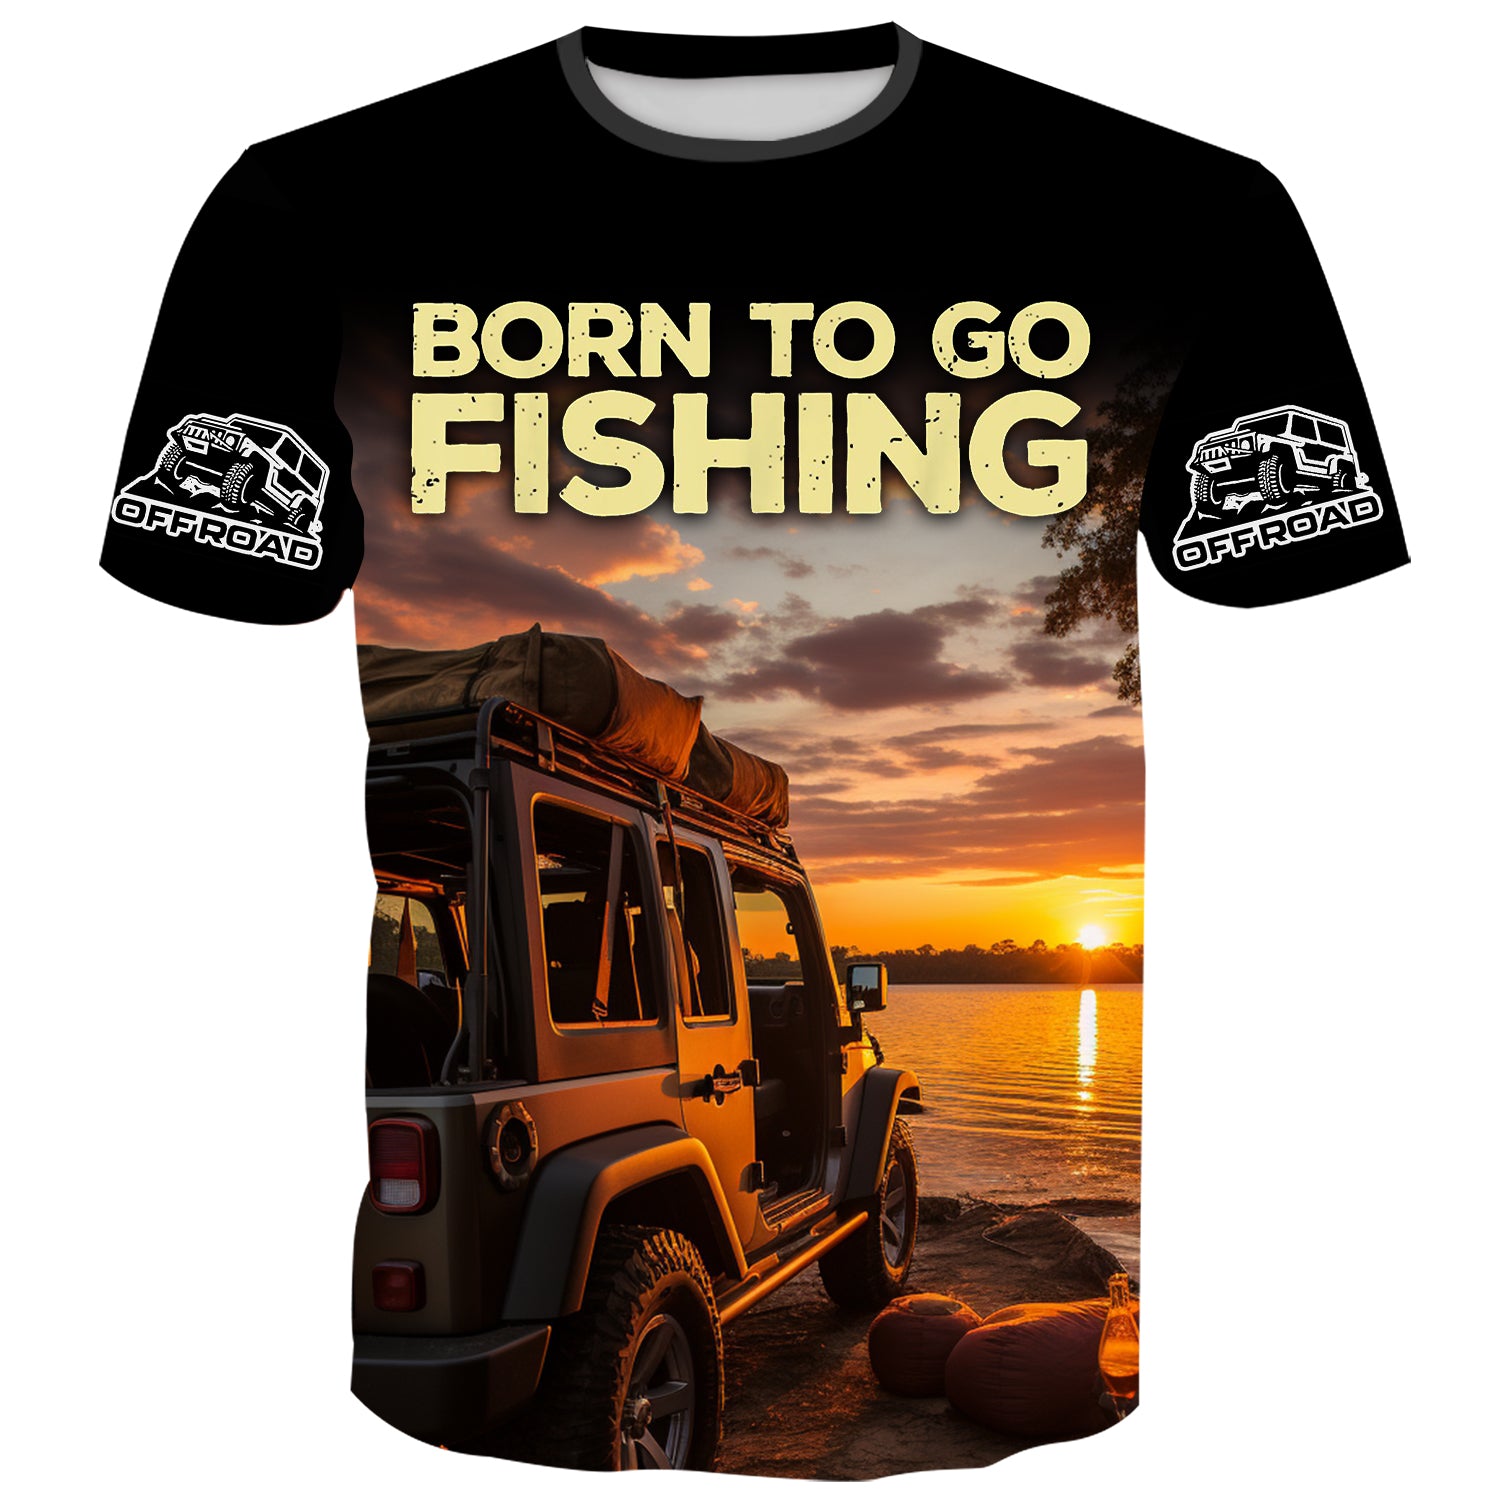 Born to Go Fishing - Jeep T-Shirt